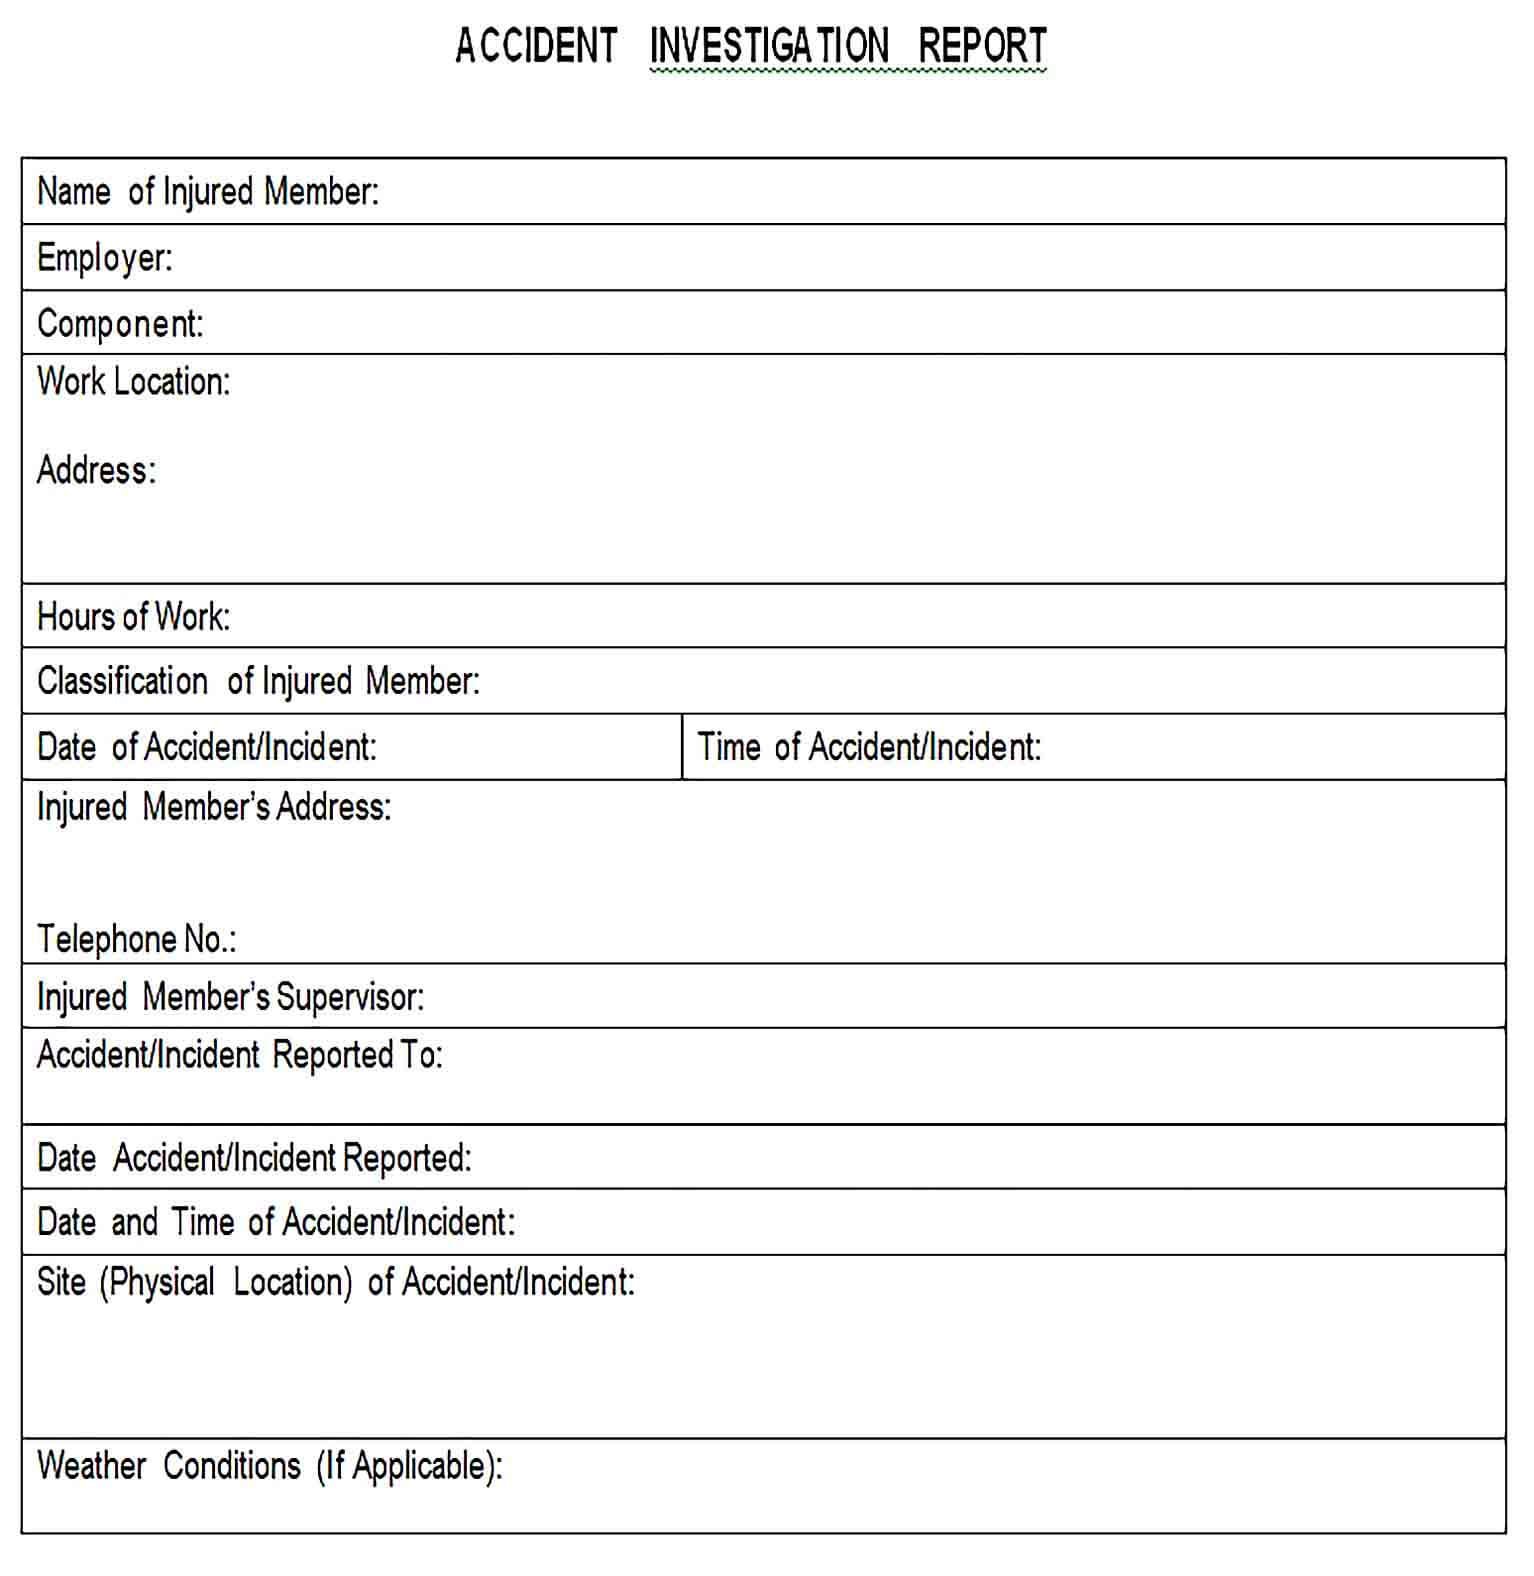 Sample Accident Investigation Report Template